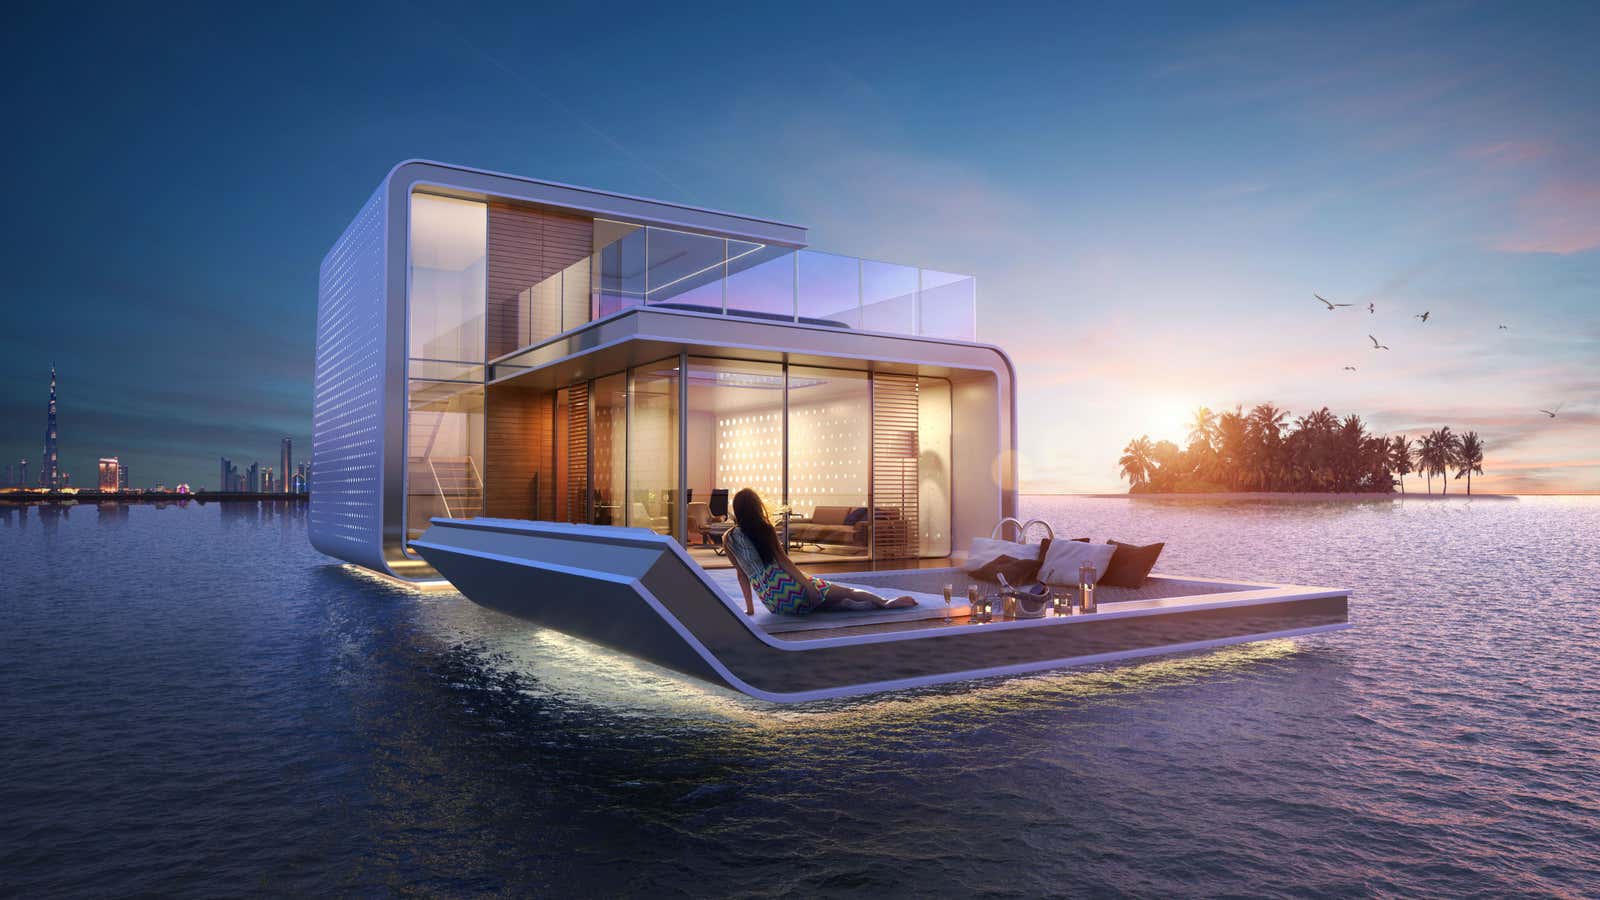 Just a giant floating seahorse house, no big deal.